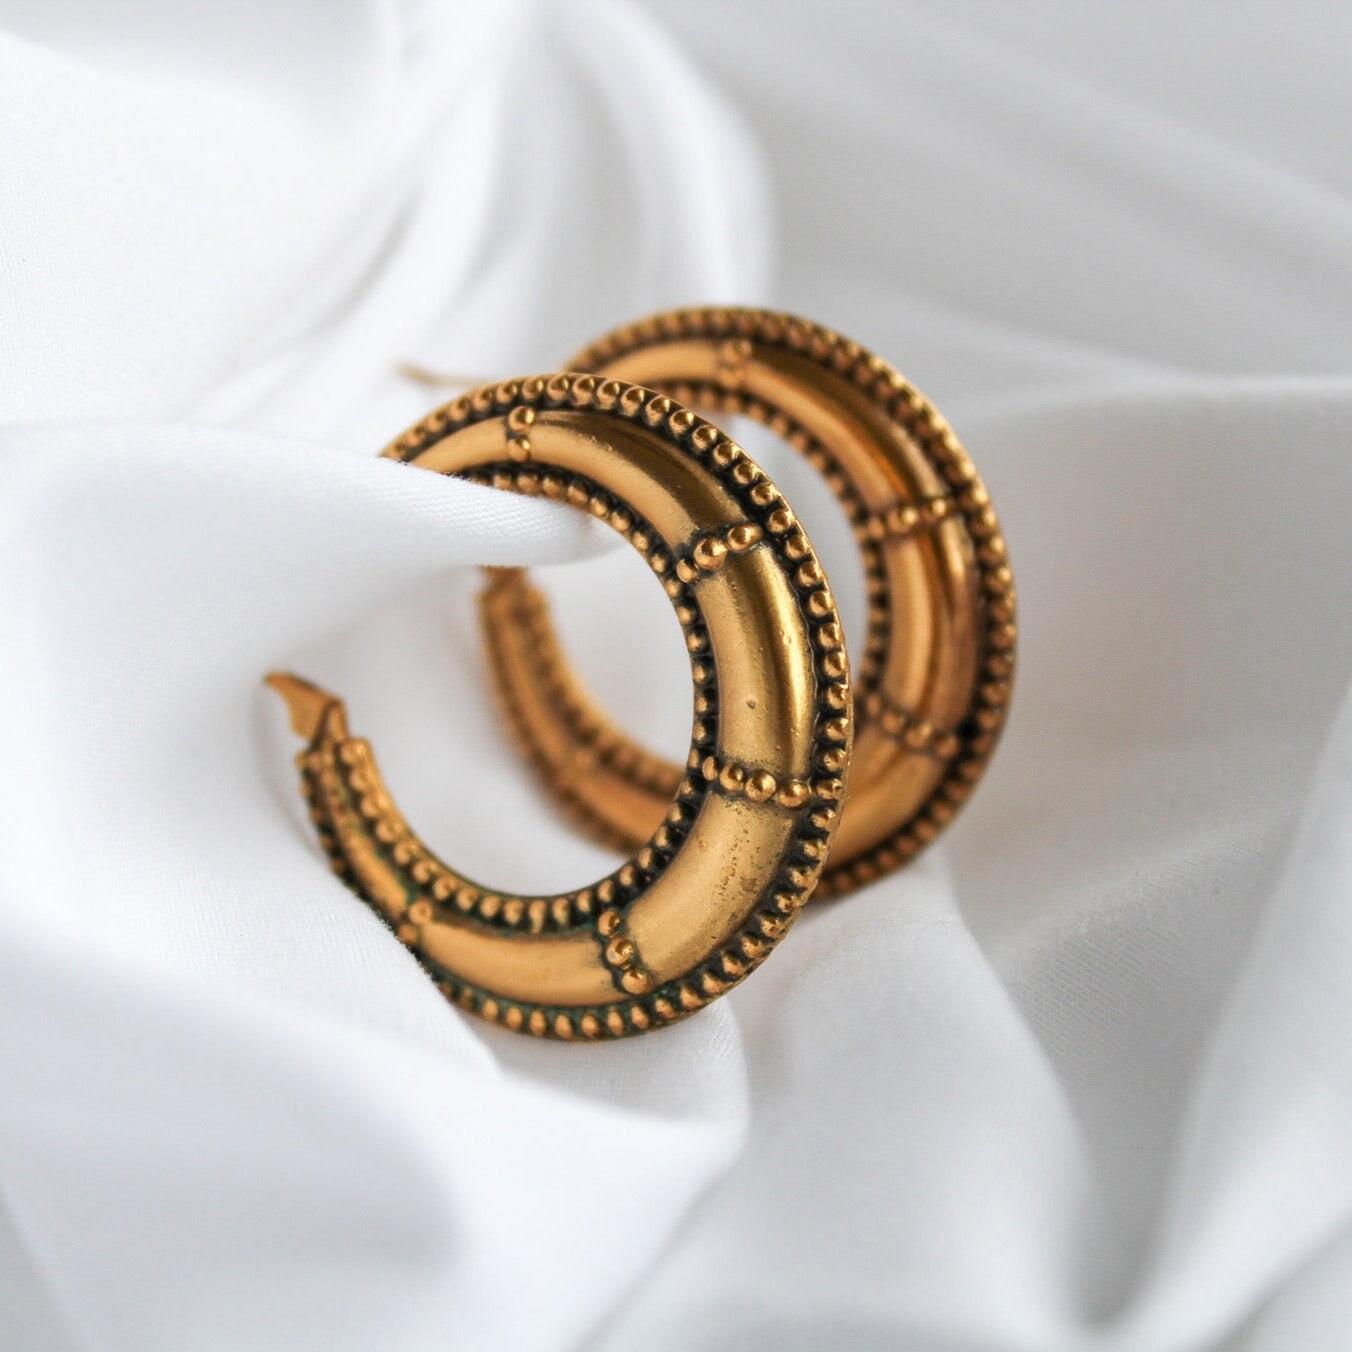 Vintage Yves Saint Laurent Gold Plated Hoop Earrings, 1990s In Excellent Condition For Sale In London, GB